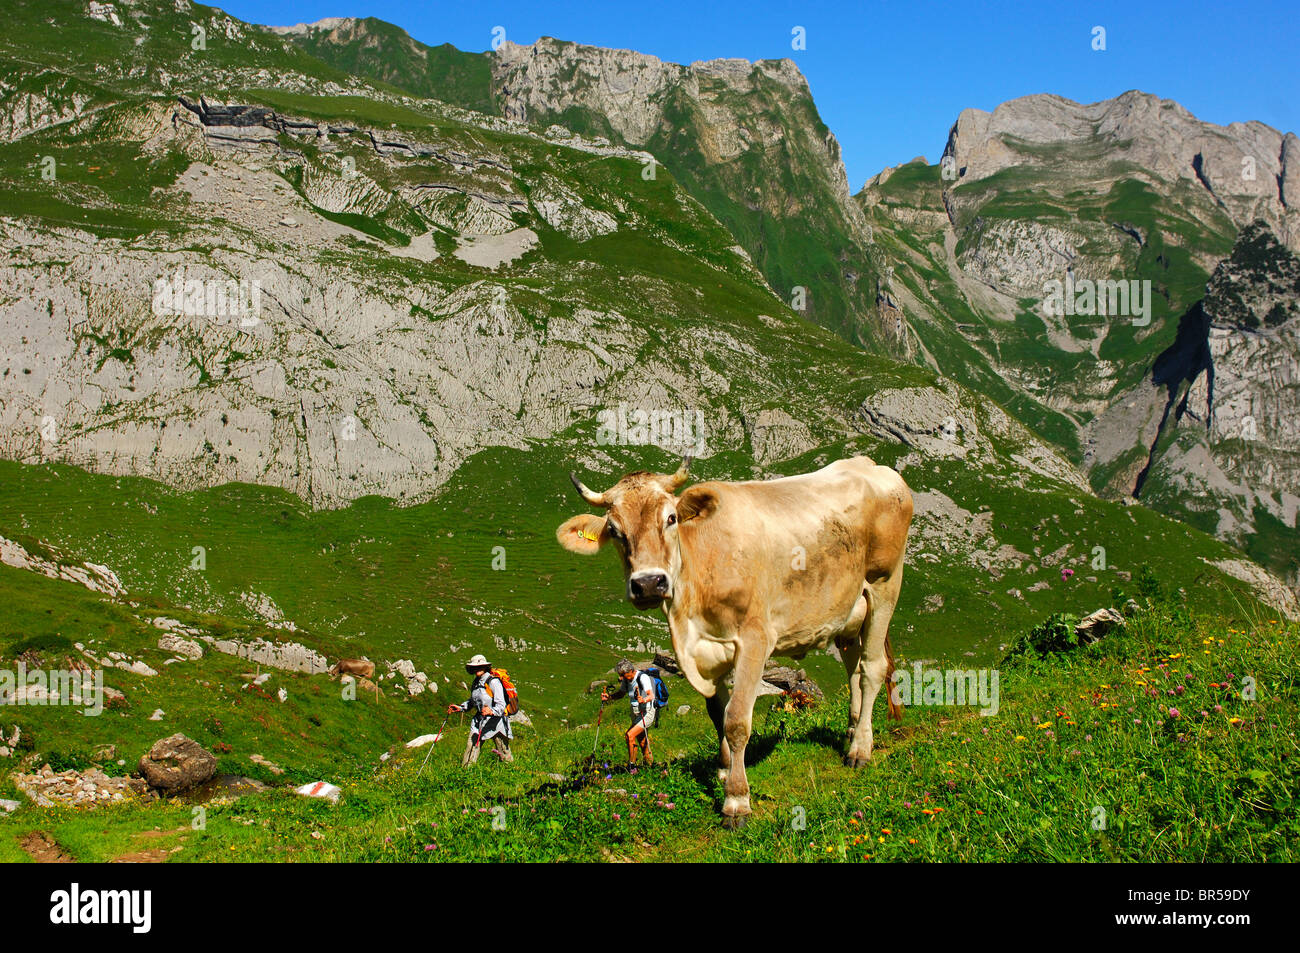 Cow and hikers in the hiking area Alpstein mountain range, canton of Appenzell Inner Rhodes, Switzerland Stock Photo